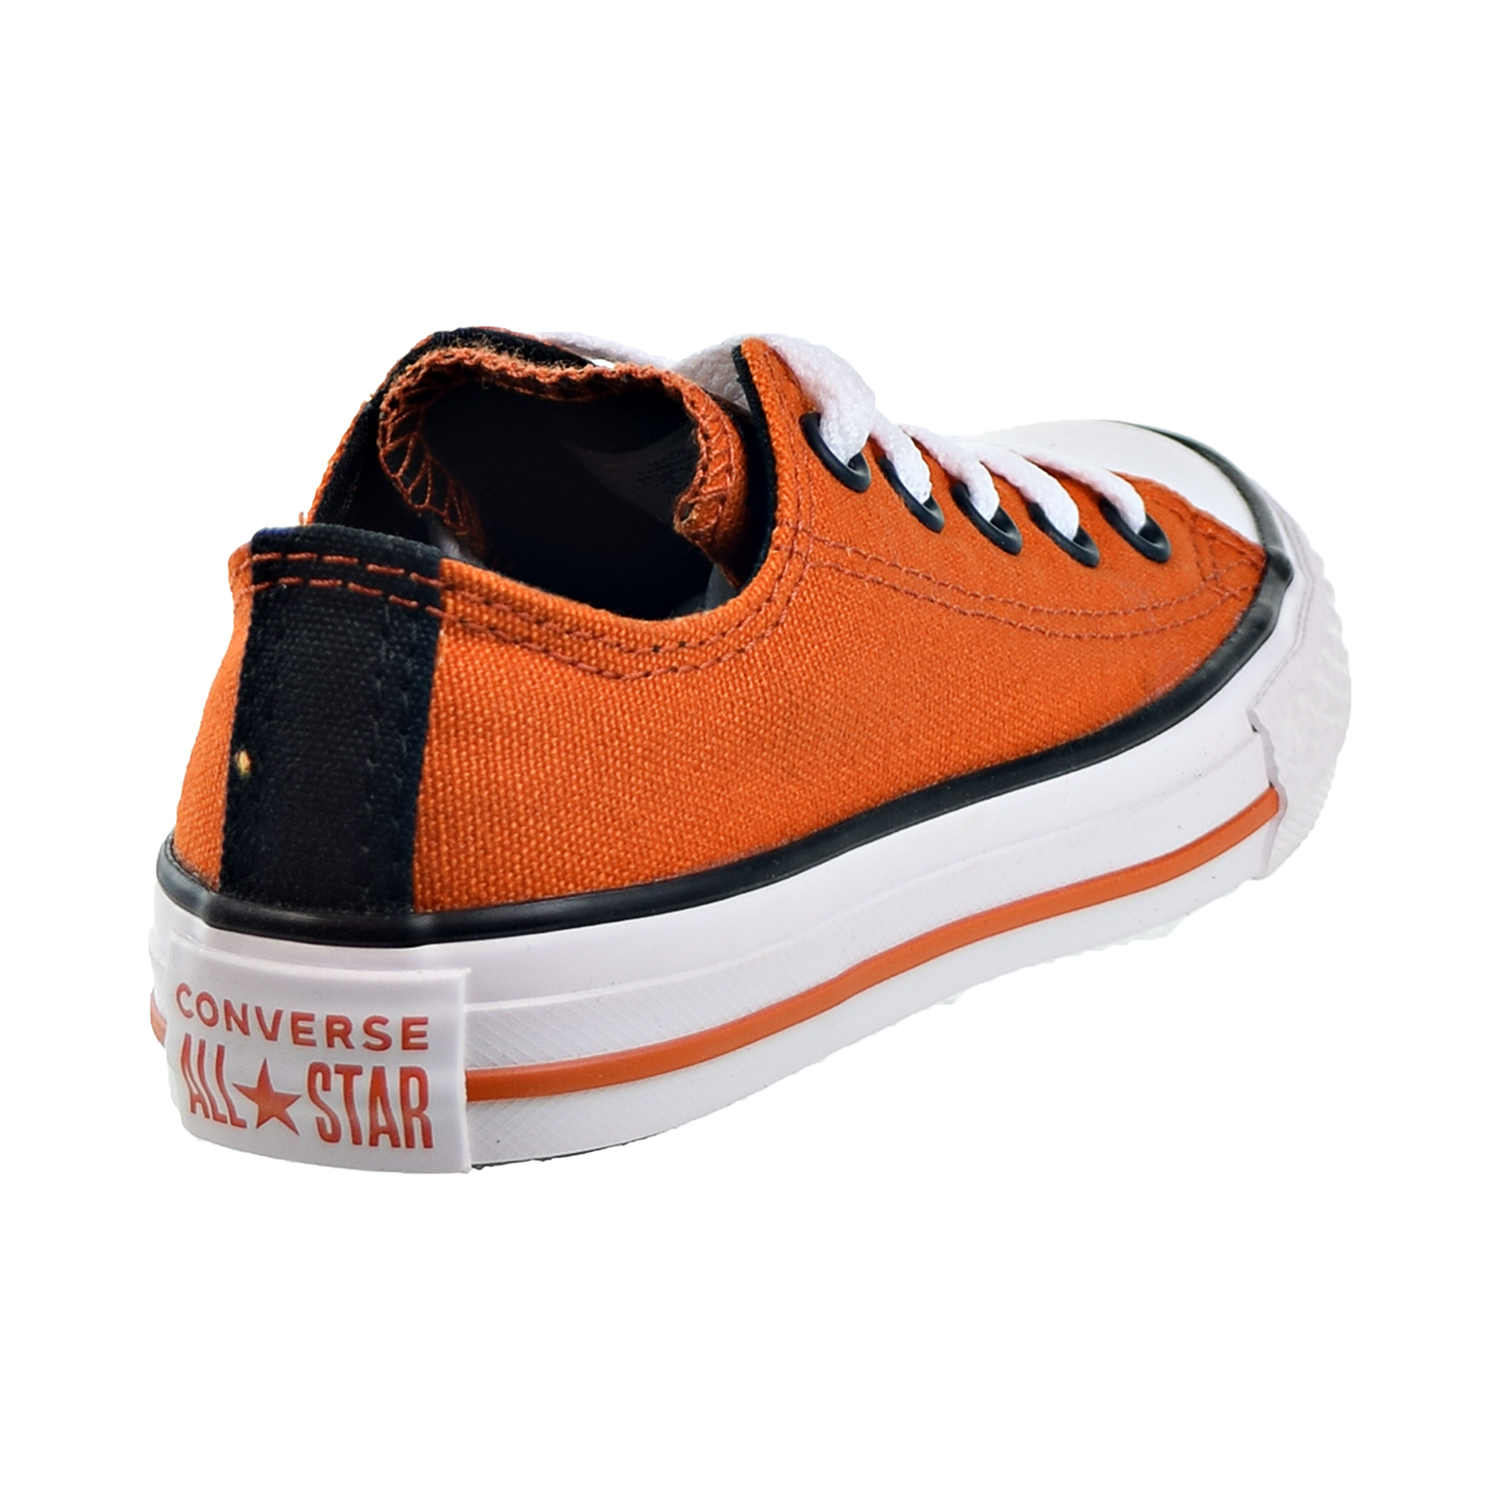 Converse Chuck Taylor All Star Ox Big Kids Shoes Campfire Orange-Black-White 661864f - image 3 of 6